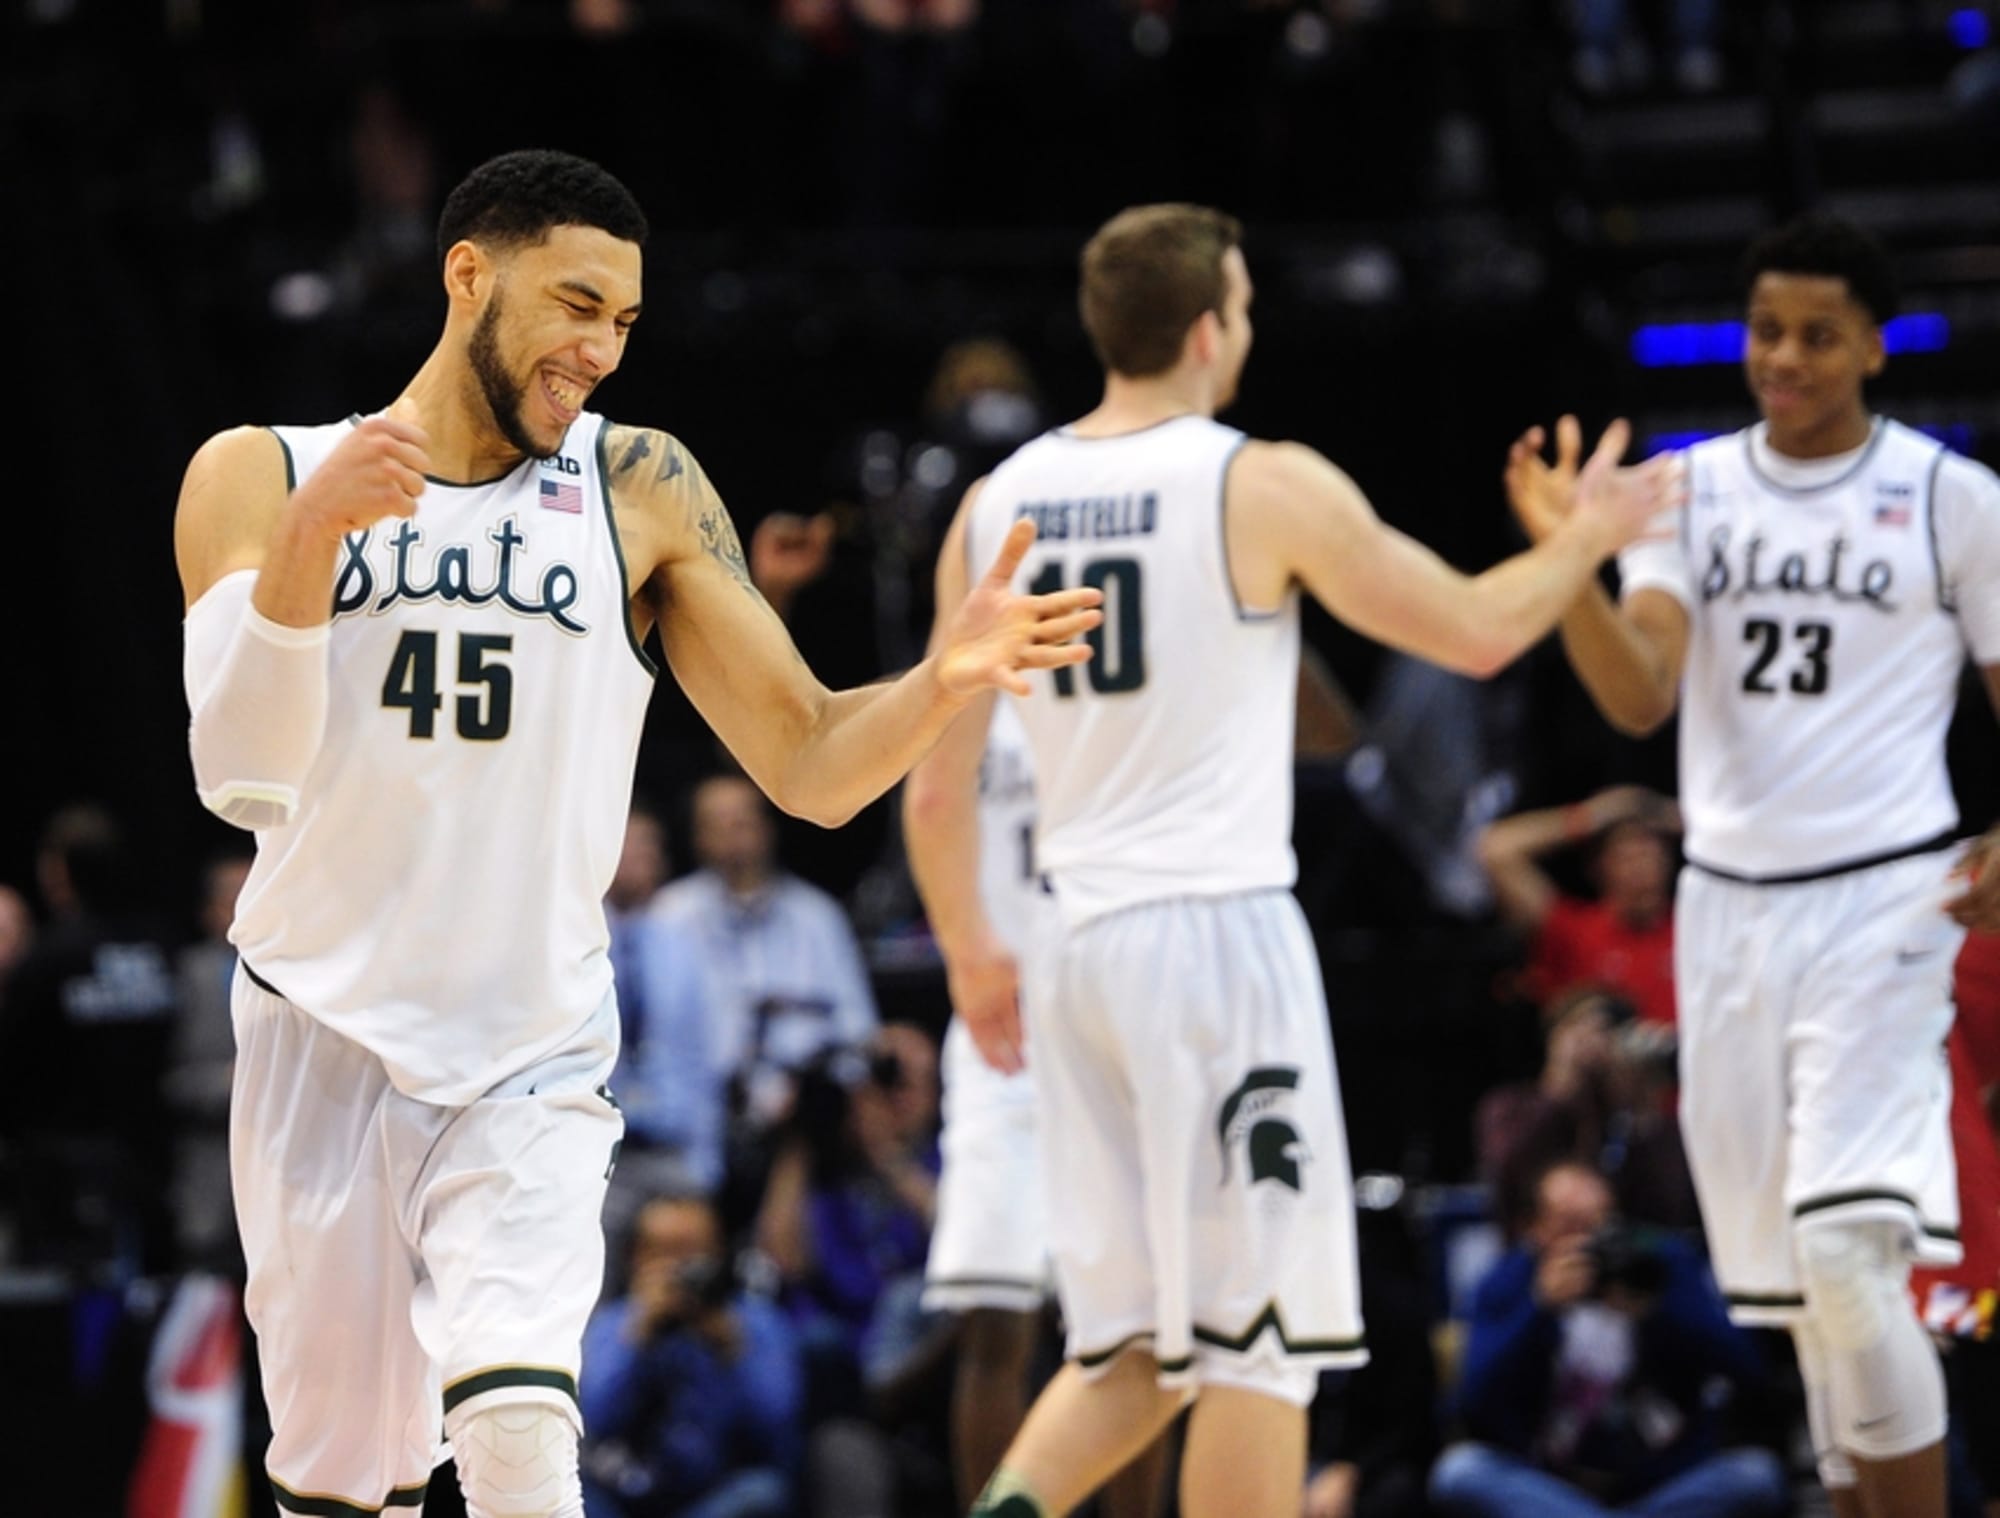 Michigan State basketball: Spartans look ready to make national